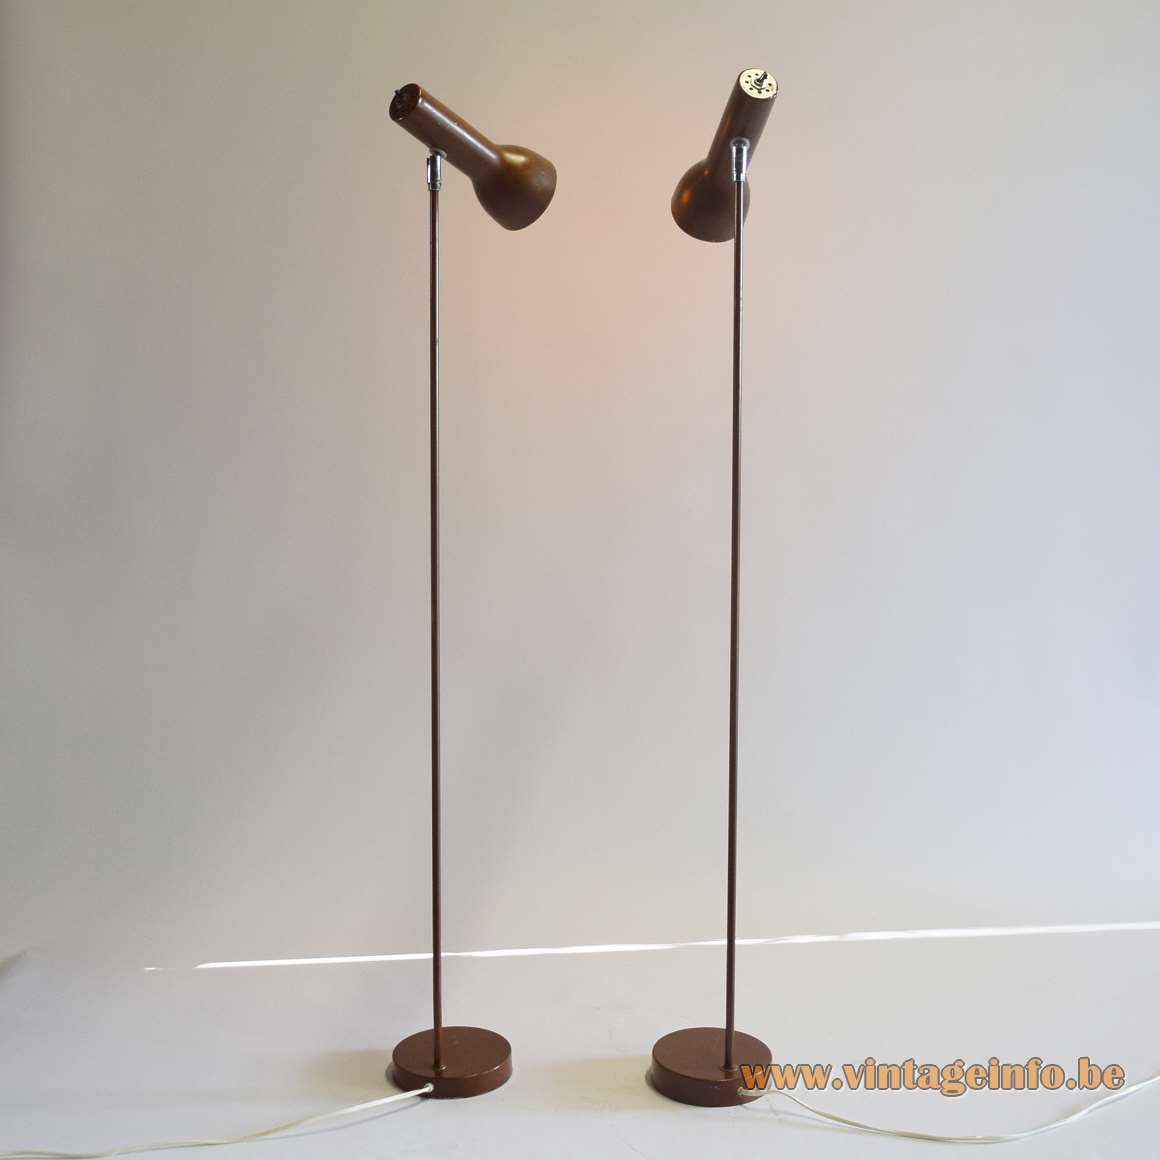 Omi 1970s Reading Floor Lamps Vintage Info All About with dimensions 1160 X 1160